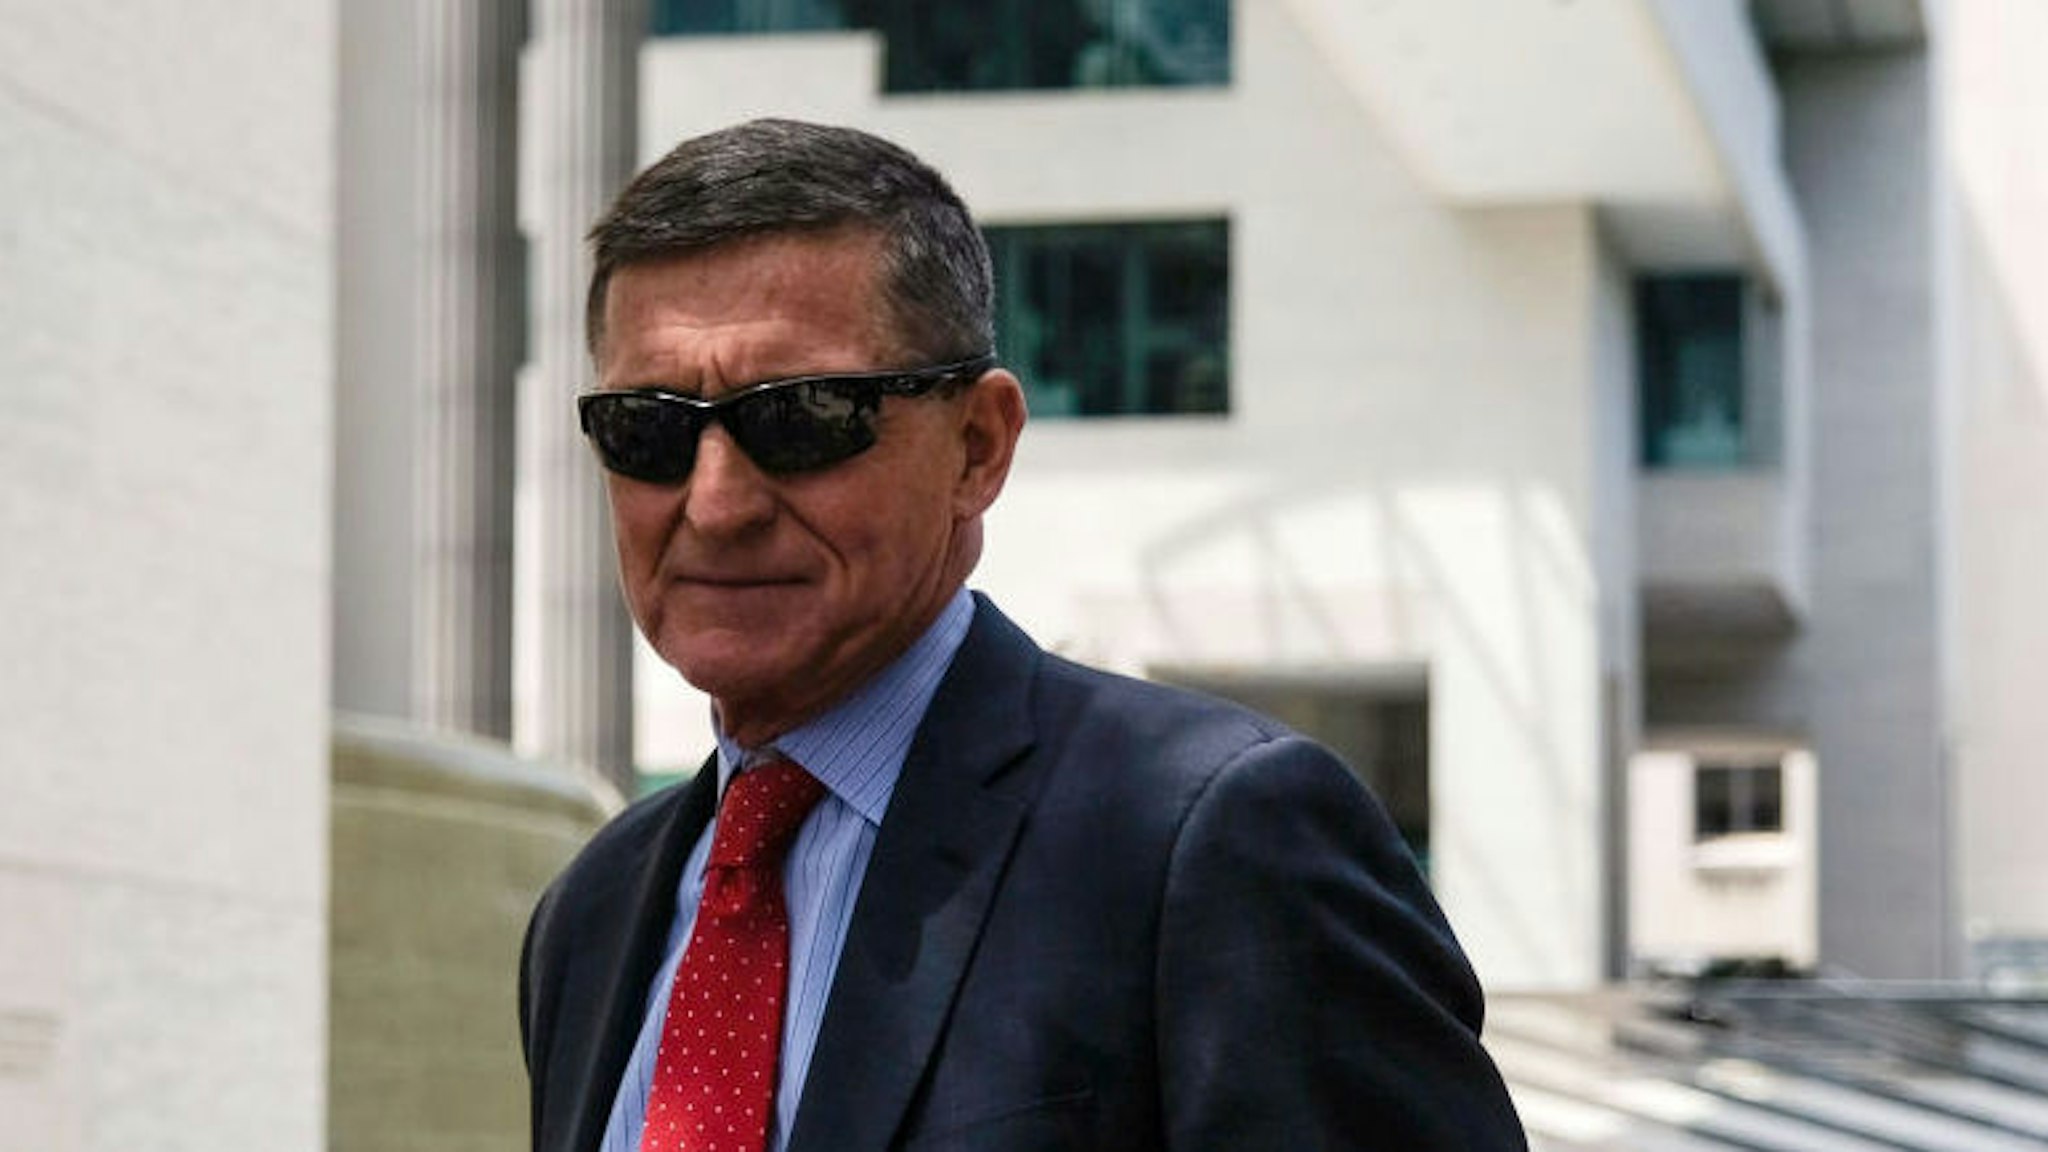 Former Trump national security advisor Michael Flynn leaves the E. Barrett Prettyman U.S. Courthouse on June 24, 2019 in Washington, DC. Flynn is expected to testify again on July 15. (Photo by Alex Wroblewski/Getty Images)